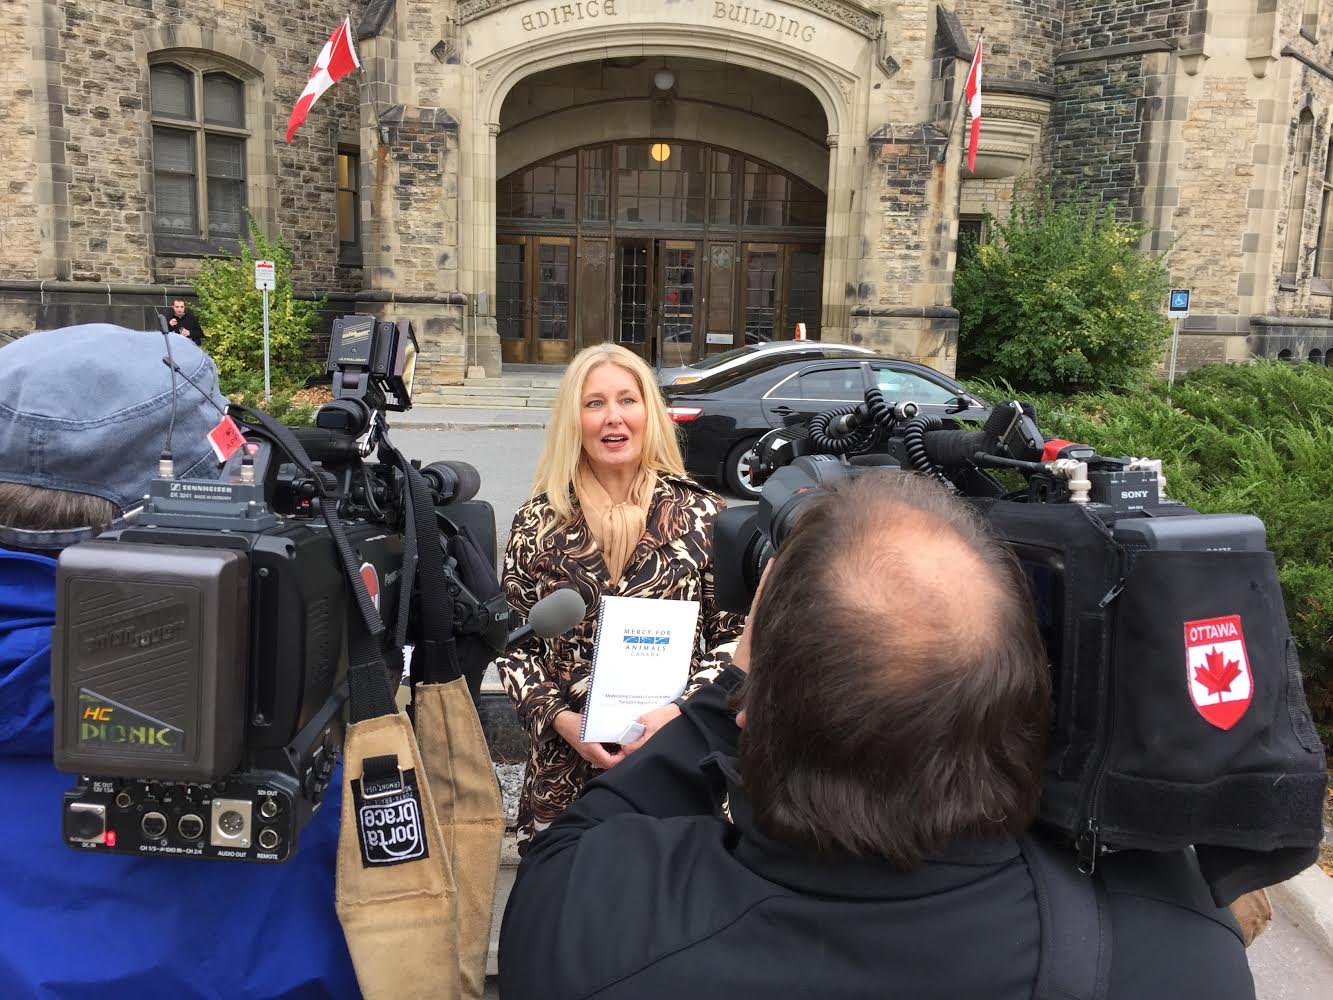 Canadaâ€™s Ag Minister Refuses to Accept Over 80,000 Signatures Demanding End to Animal Torture